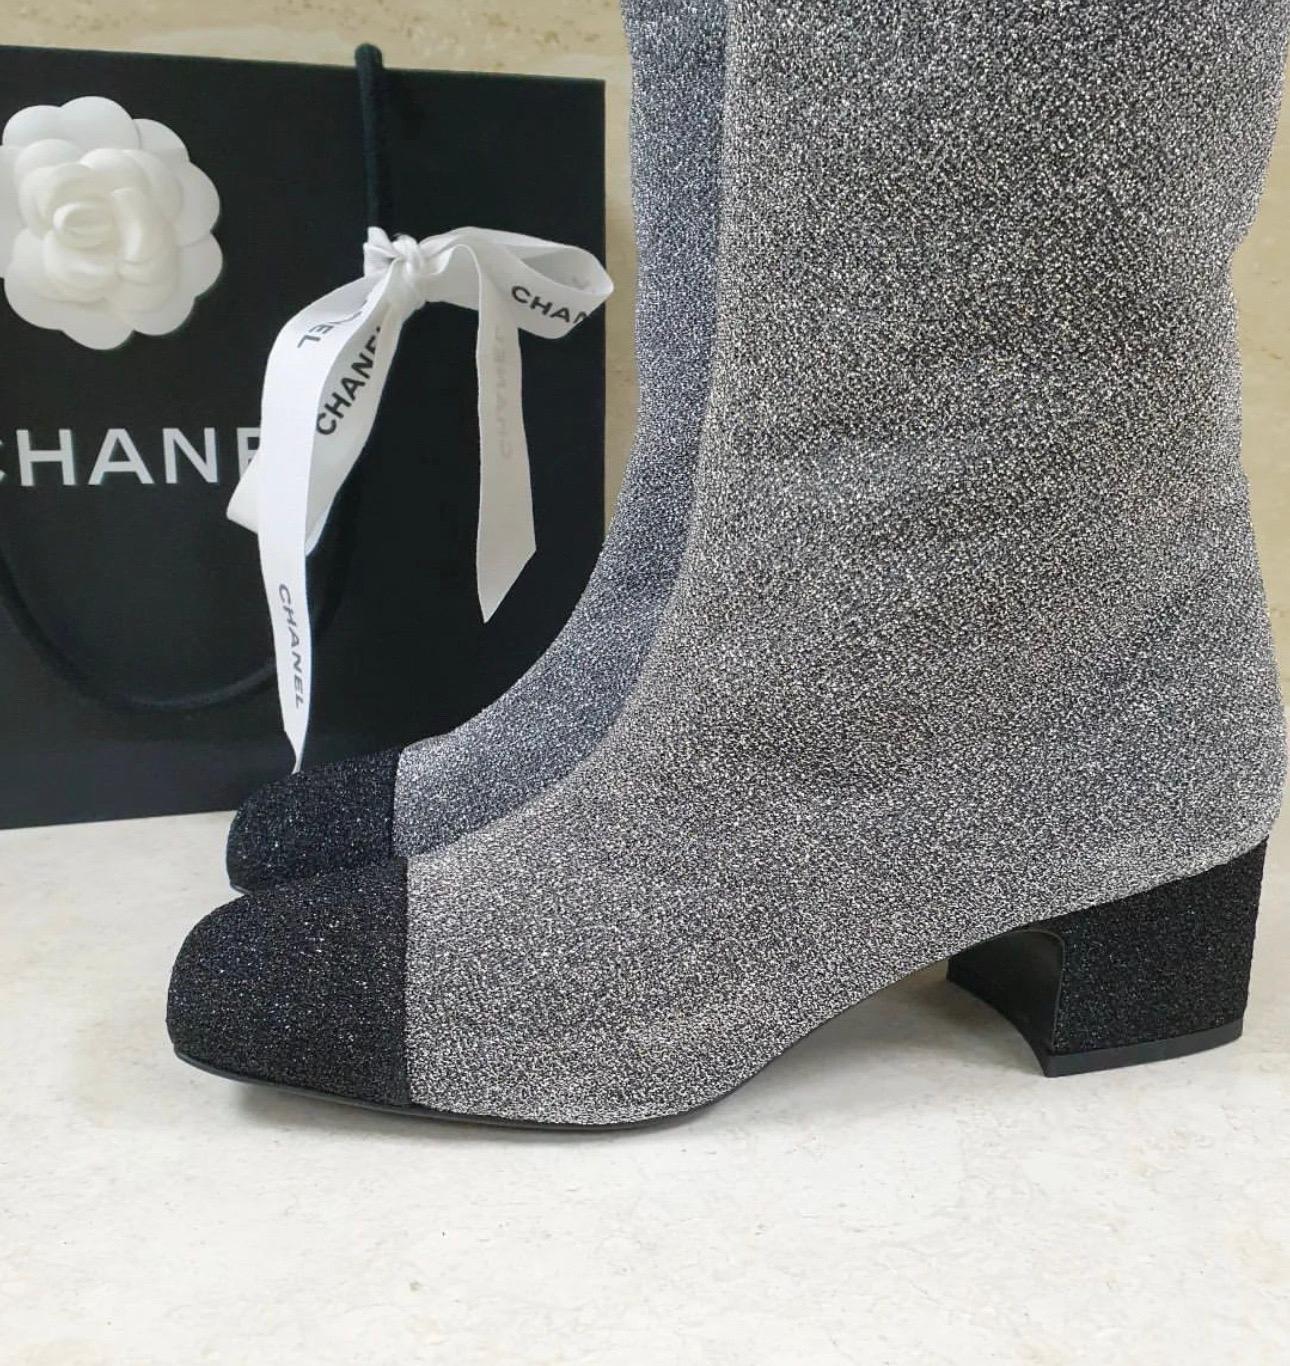 Chanel boots in silver glitter featuring a black patent leather block heel and square cap toes. They have been adorned with the iconic CC logo at the top and come equipped with comfortable leather-lined insoles. 
Sz.39
Never warn. Just tried